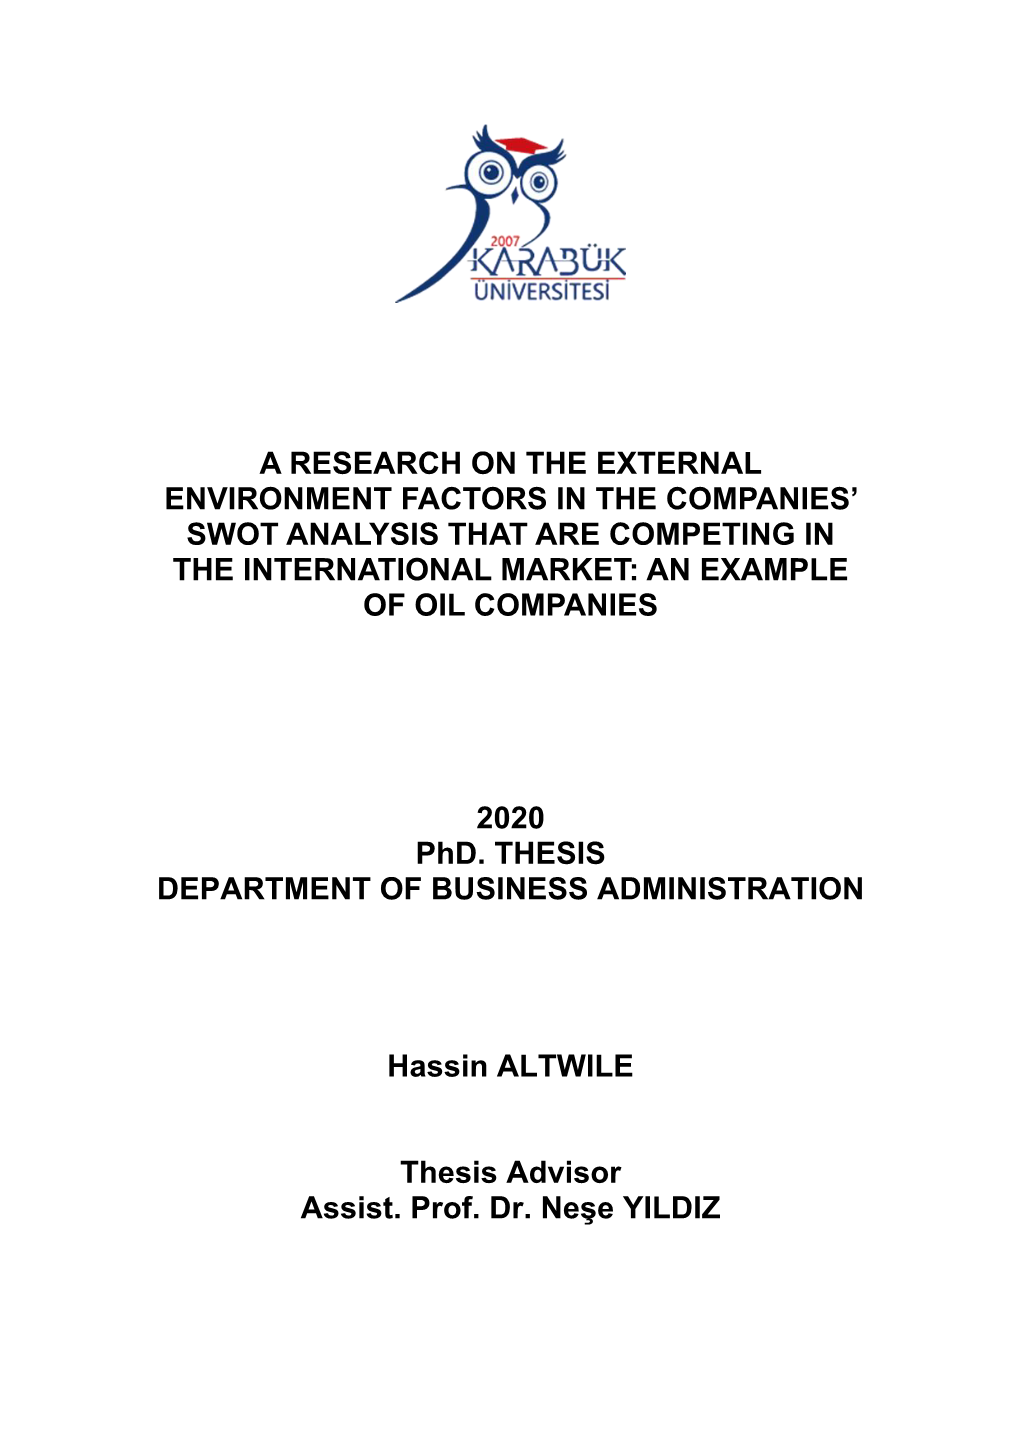 A Research on the External Environment Factors in the Companies' Swot Analysis That Are Competing in the International Market